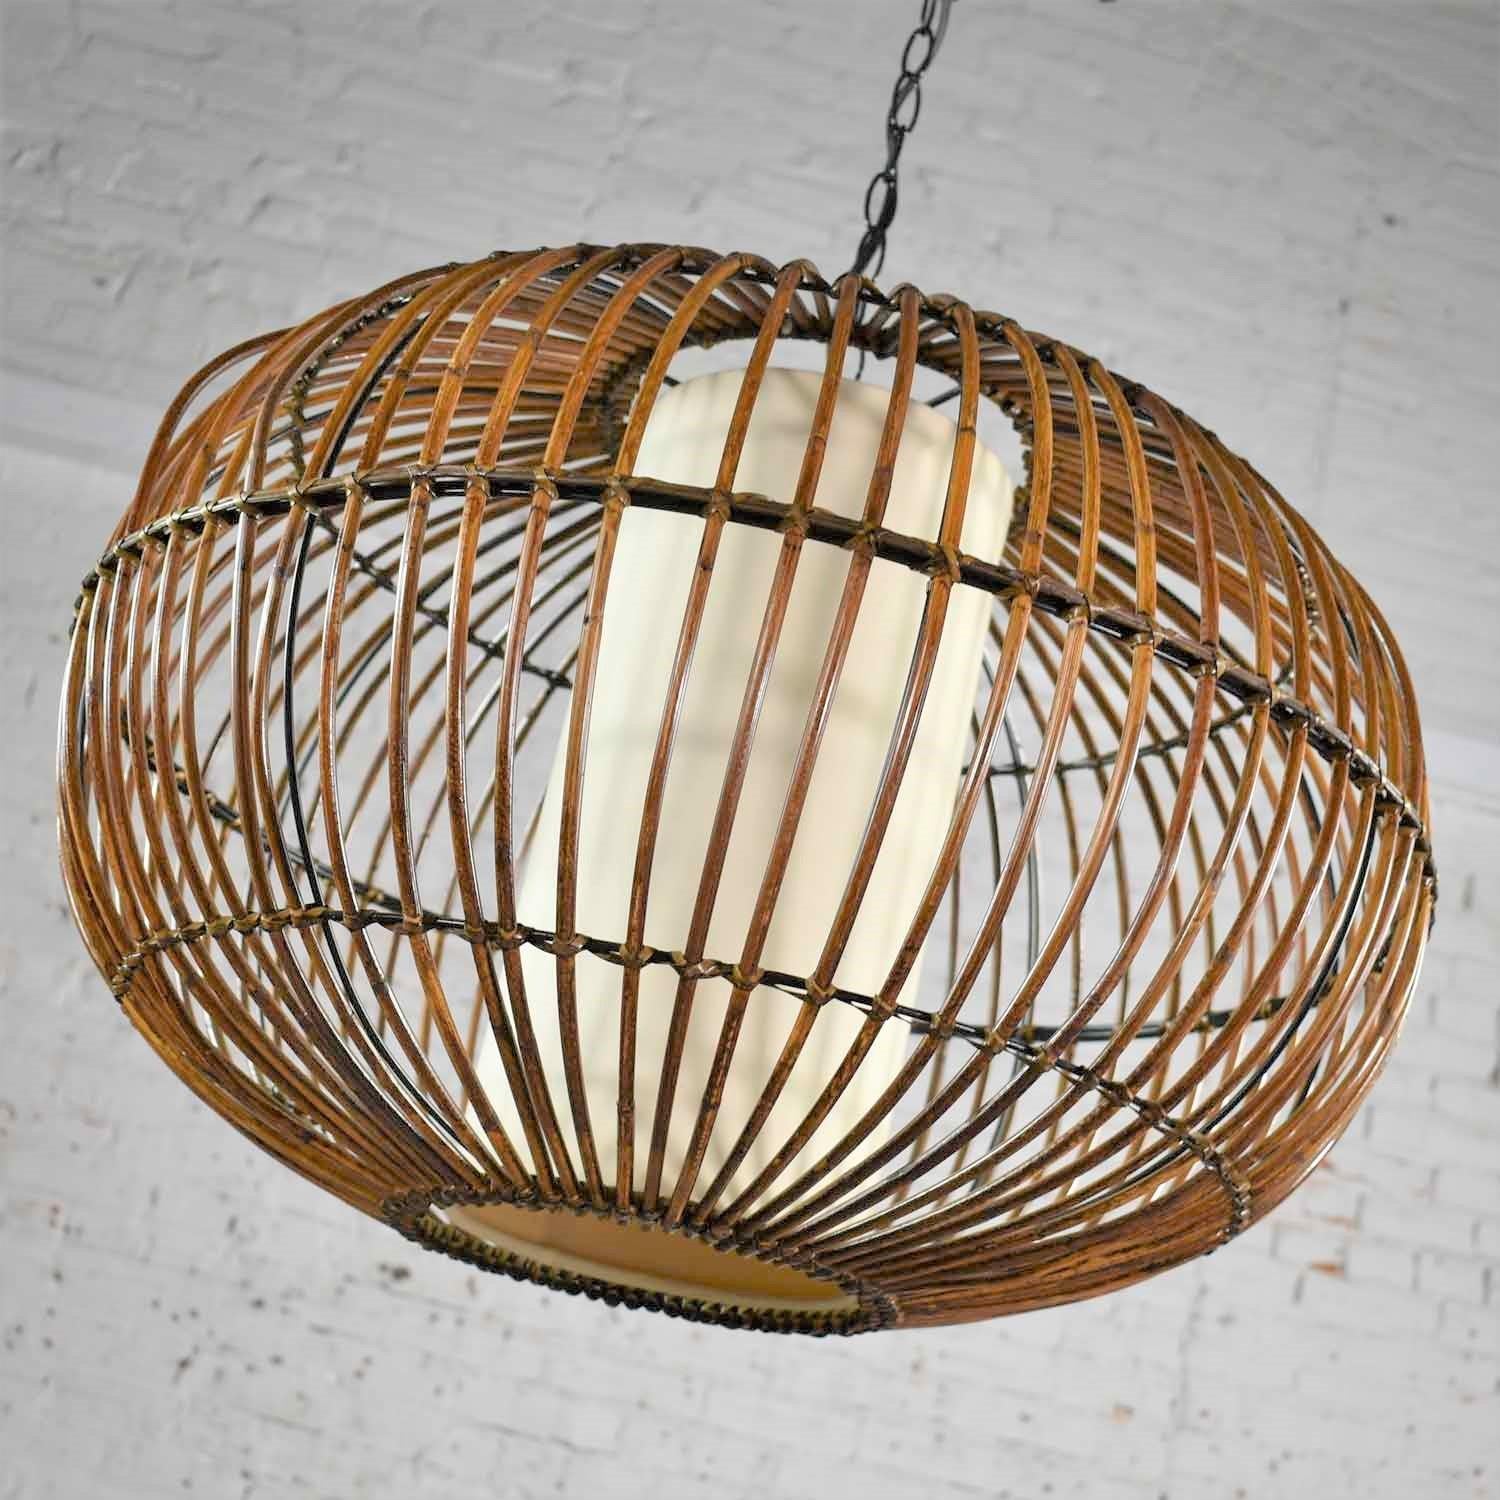 Handsome vintage MCM, Mid-Century Modern, rattan bird cage style pendant chandelier with interior drum shade after Franco Albini. It is in fabulous vintage condition with normal age appropriate wear. There is some wrinkling to the interior drum